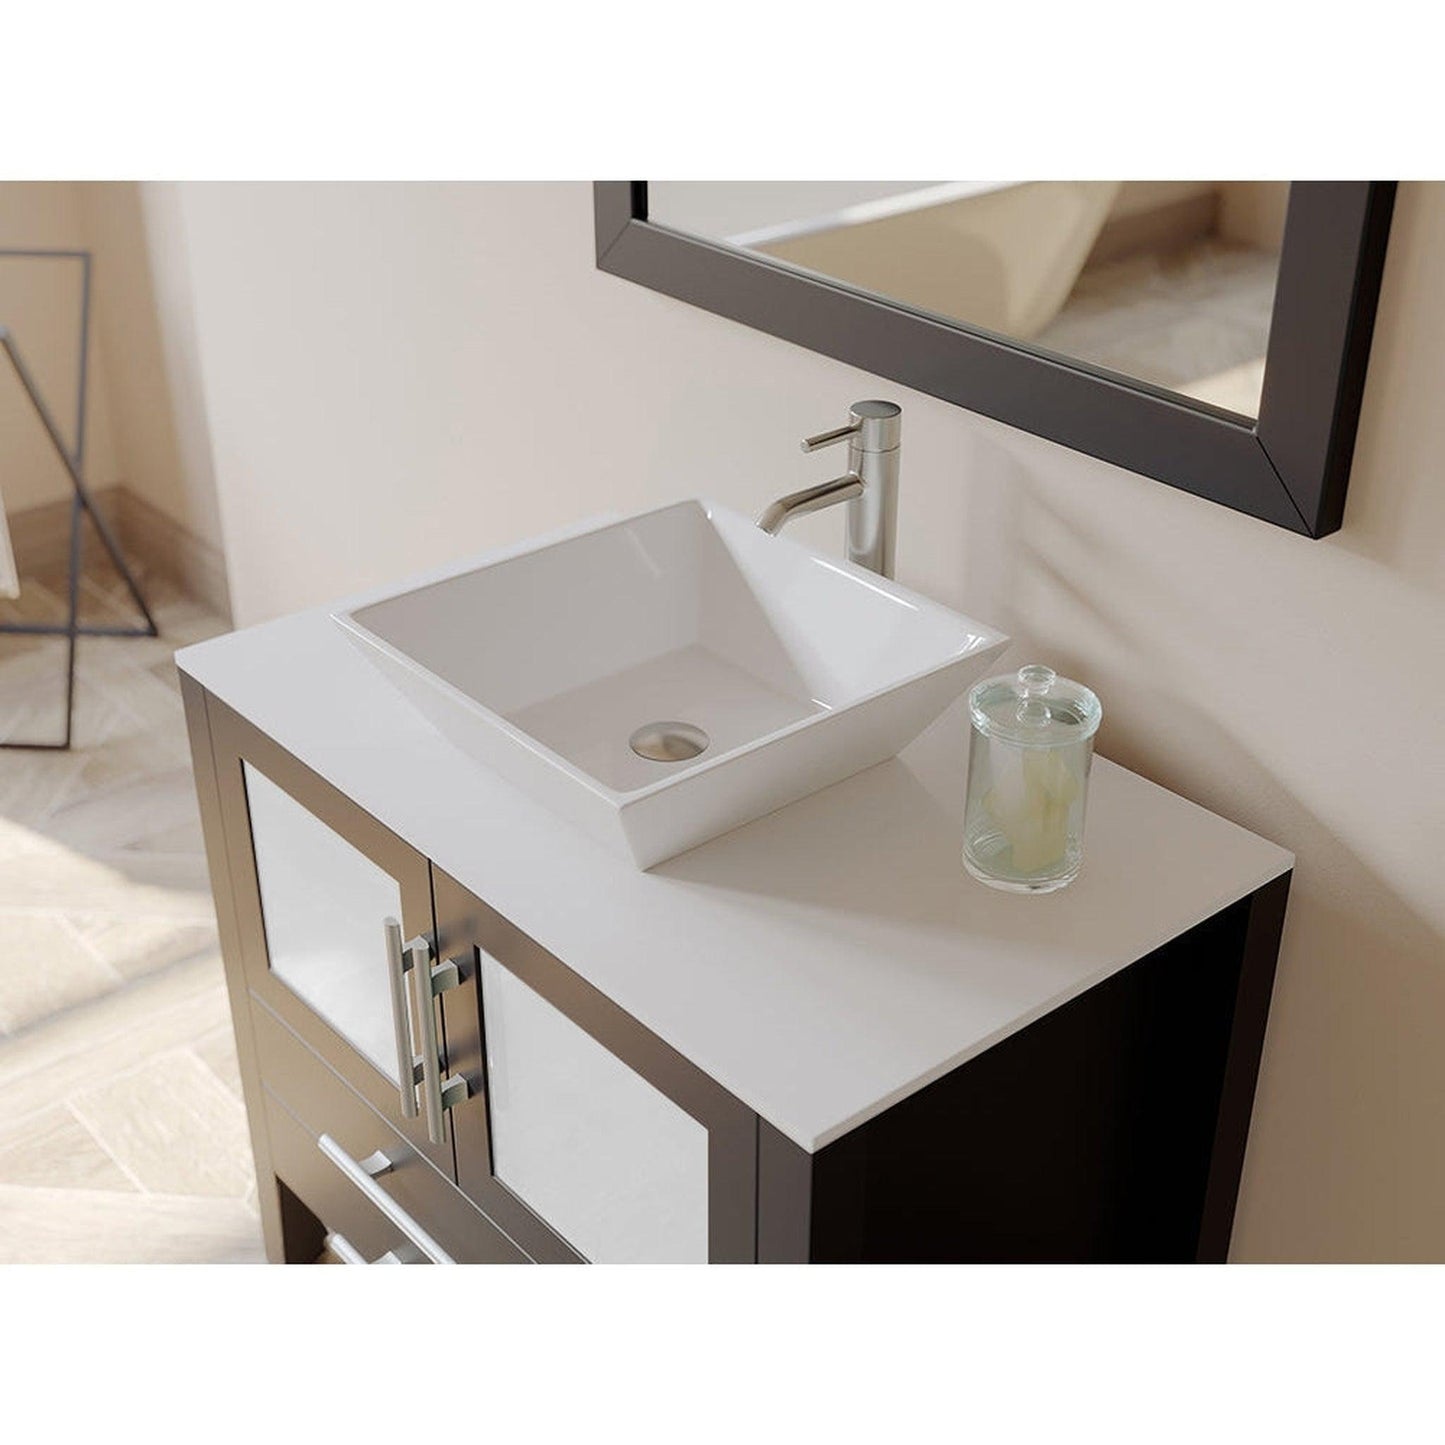 Cambridge Plumbing 36" Black Espresso Wood Single Vanity Set With Porcelain Countertop And Square Vessel Sink With Brushed Nickel Plumbing Finish